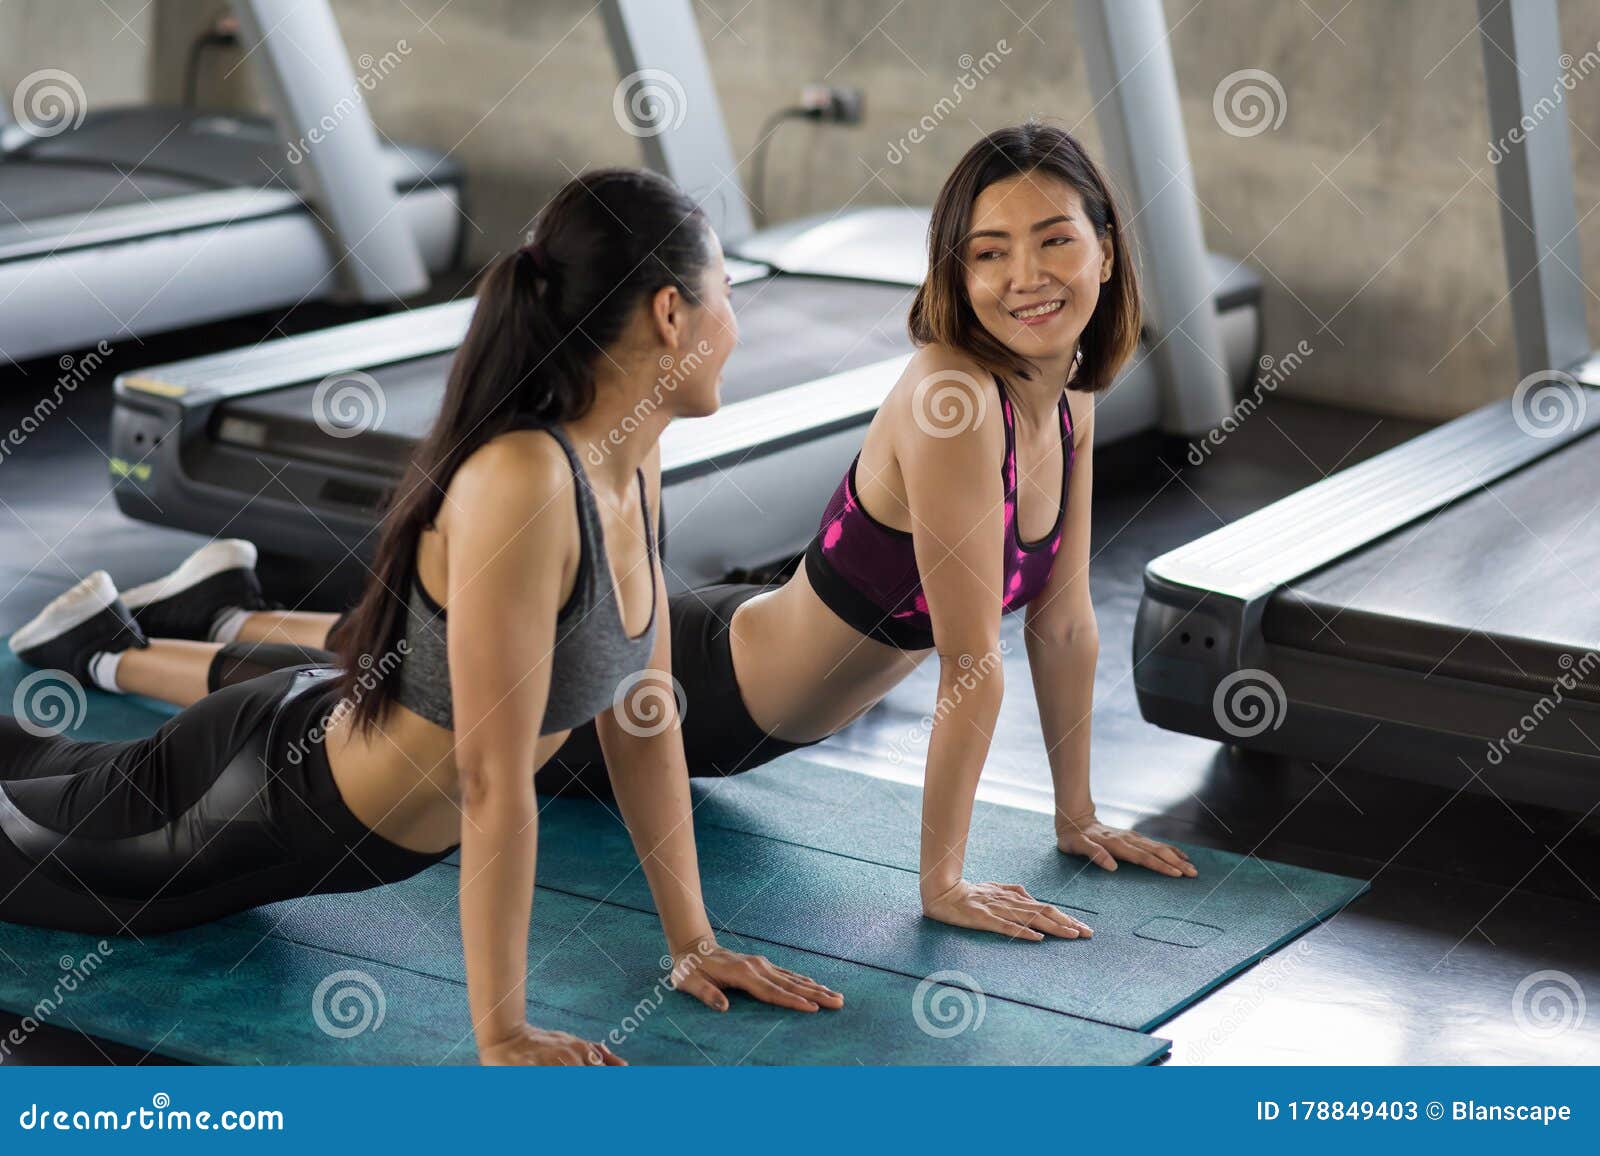 Fitness lesbians having fun in the gym